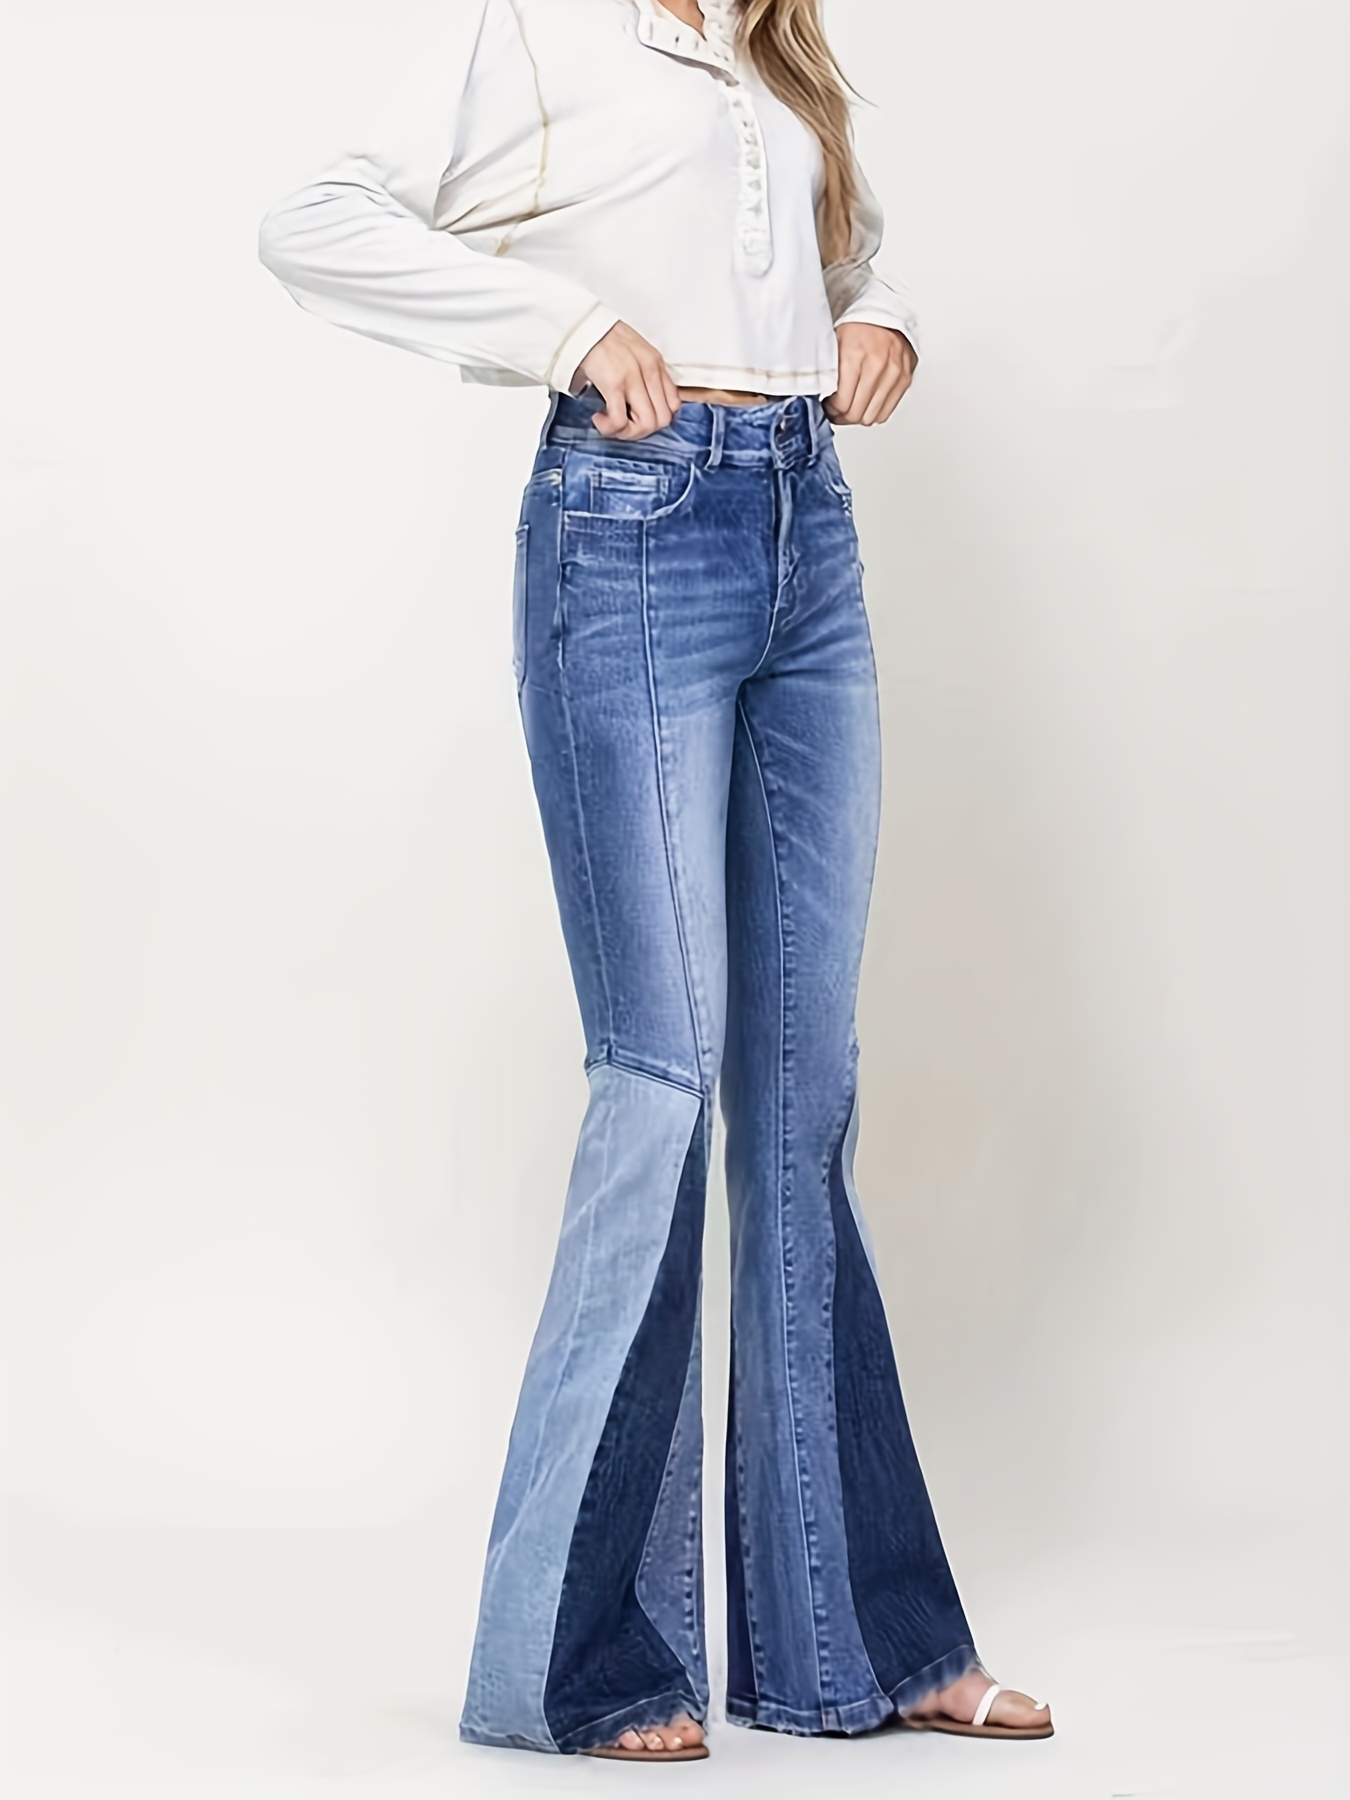 Three Tone * Color Block Flare Jeans, 70s Vintage High * Whiskering Pintuck  Bell Bottoms Jeans, Women's Denim Jeans & Clothing